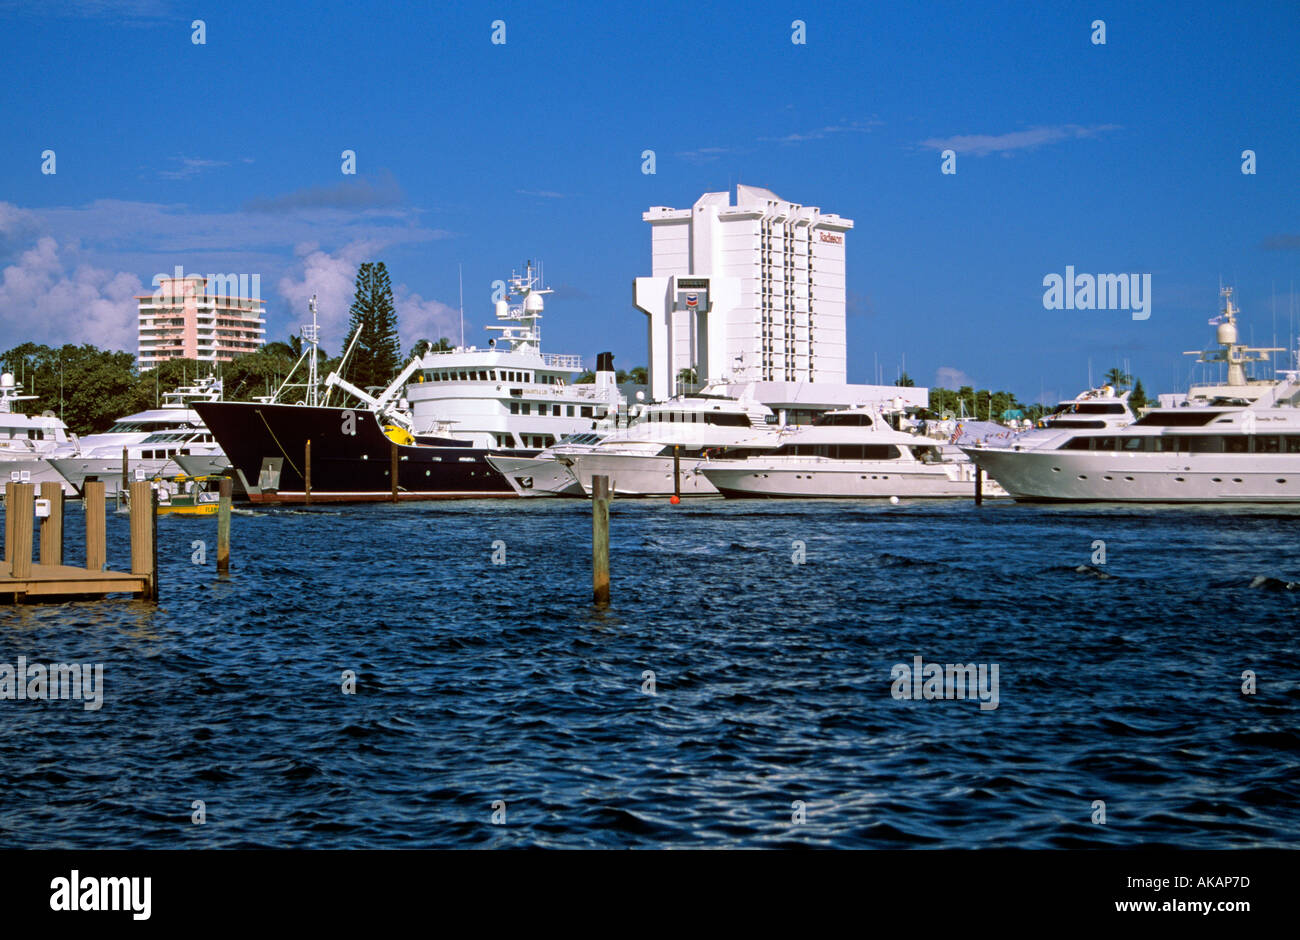 Yachts moored in inter coastal waterway Fort Lauderdale Florida USA Stock Photo